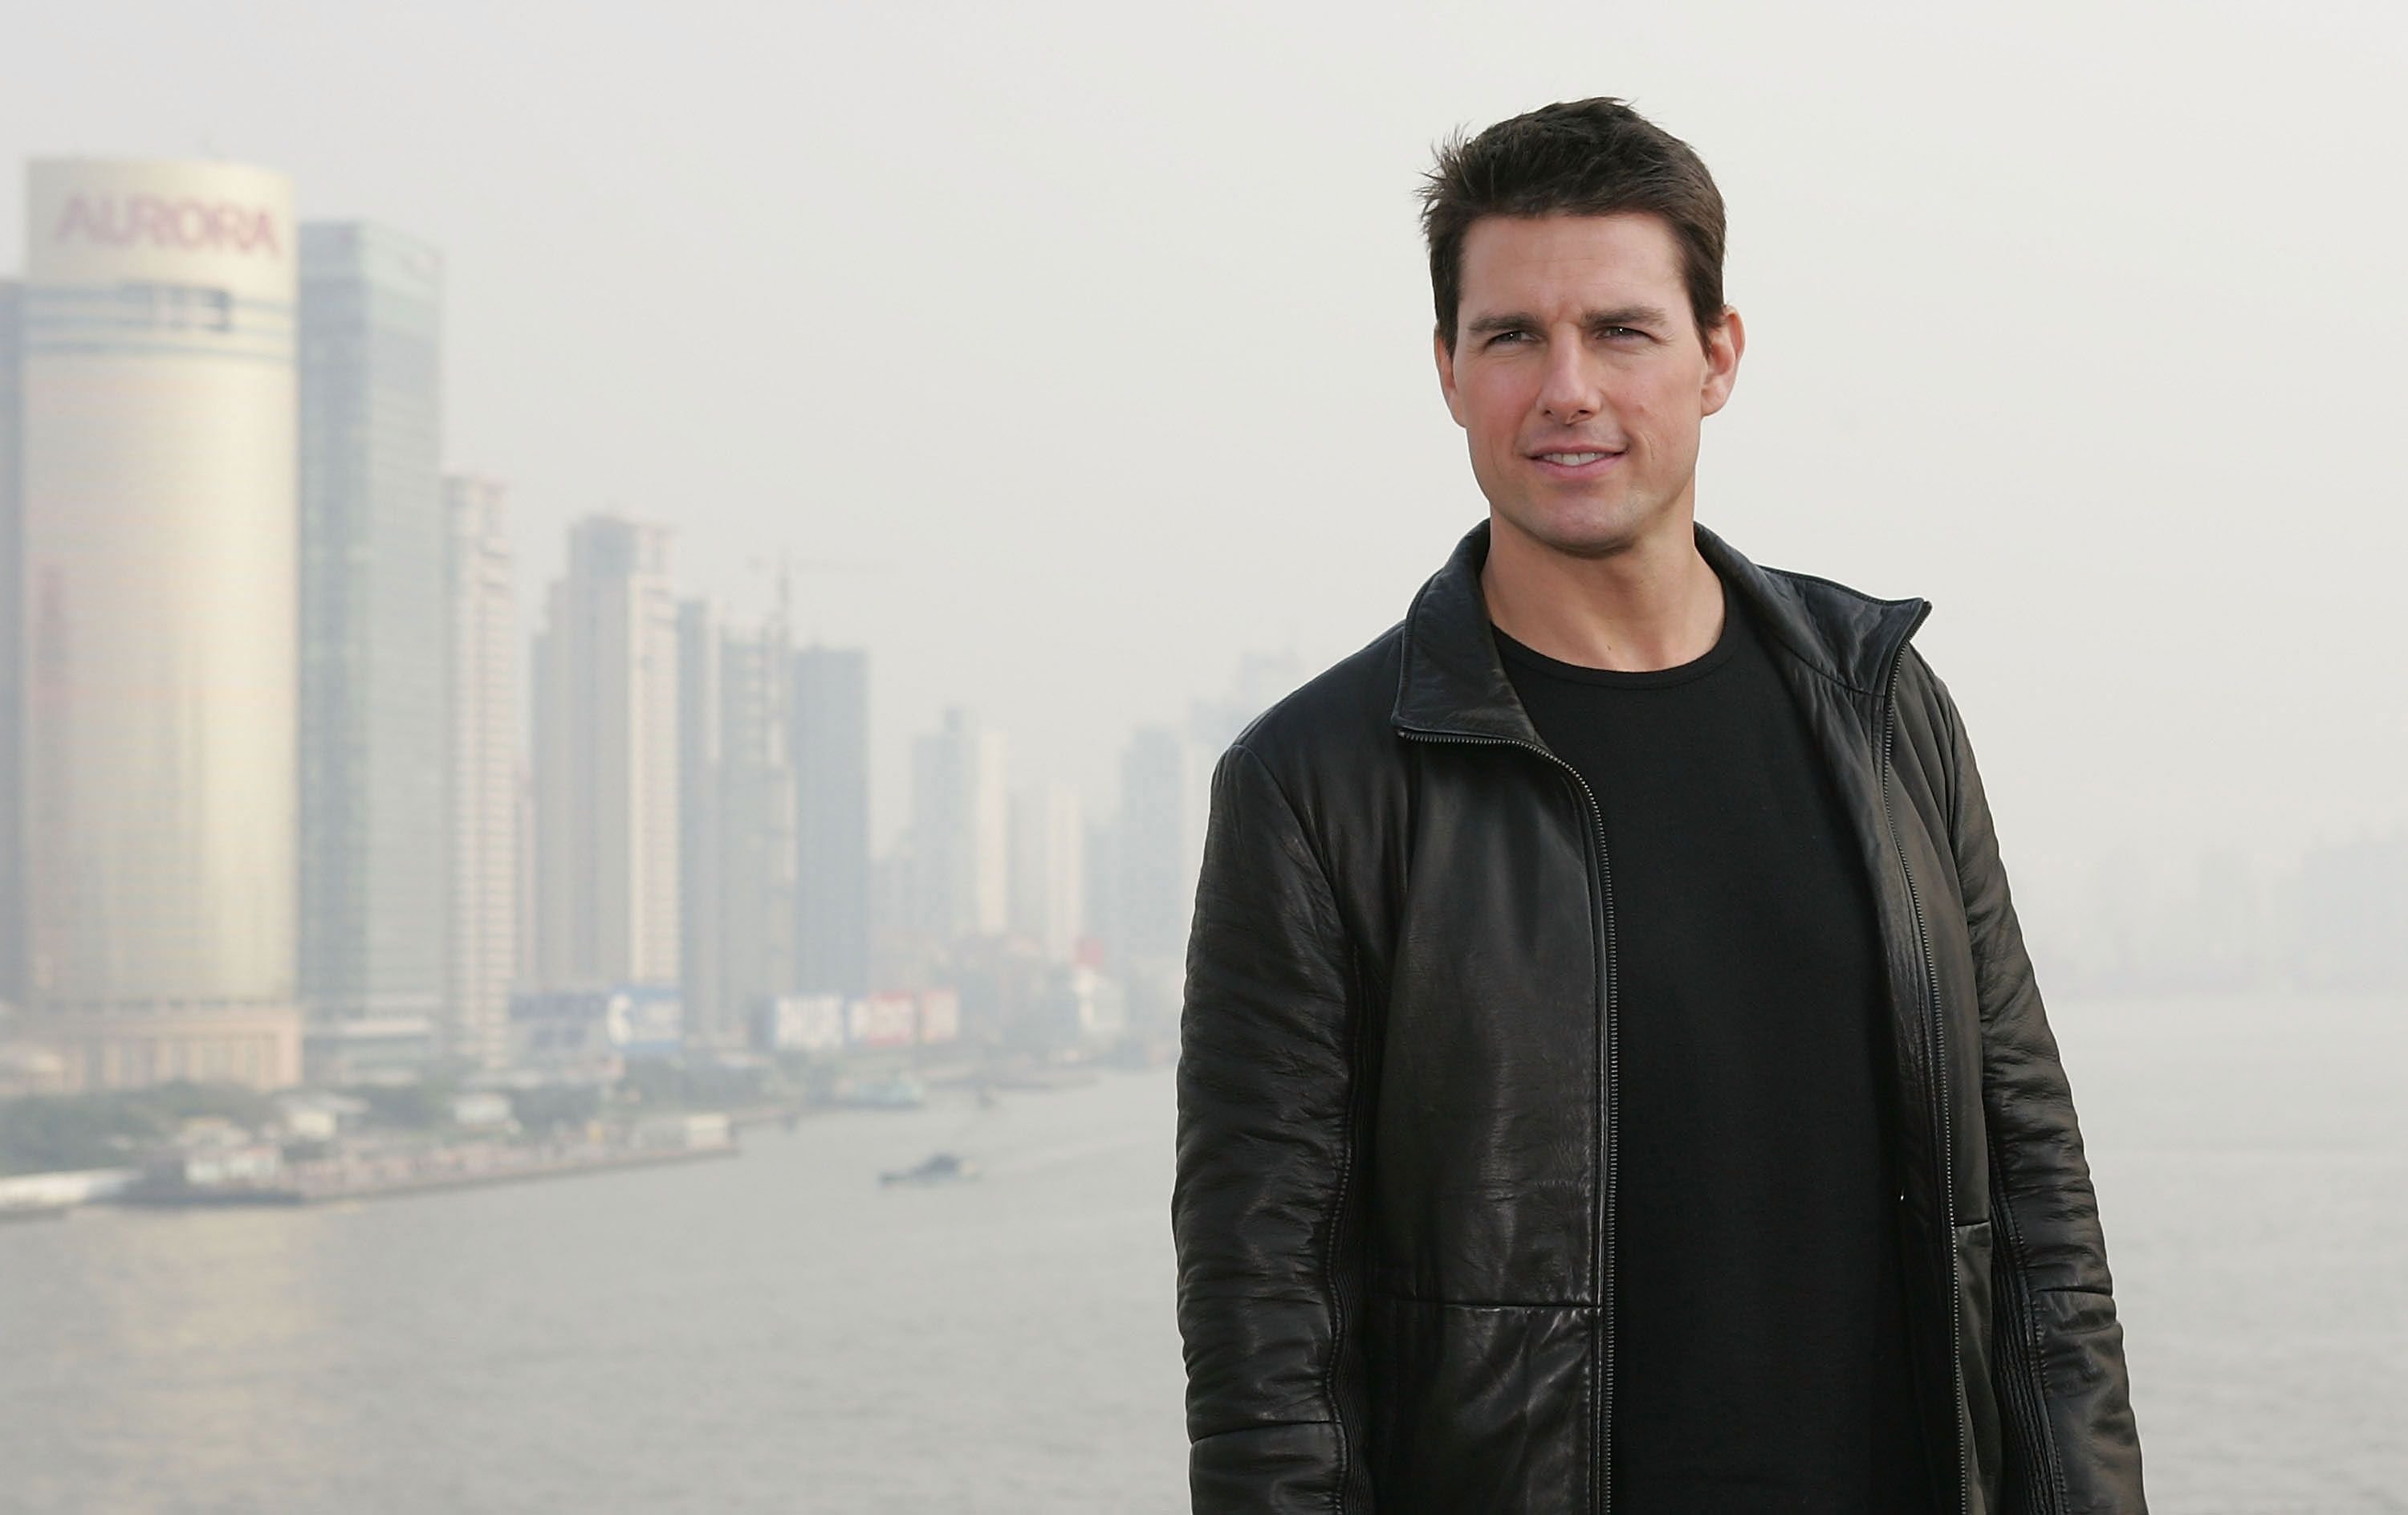 Tom Cruise poses as he promotes "Mission Impossible III" on top Shanghai's historic Bund 18 building on November 30, 2005 in China. | Photo: Getty Images.